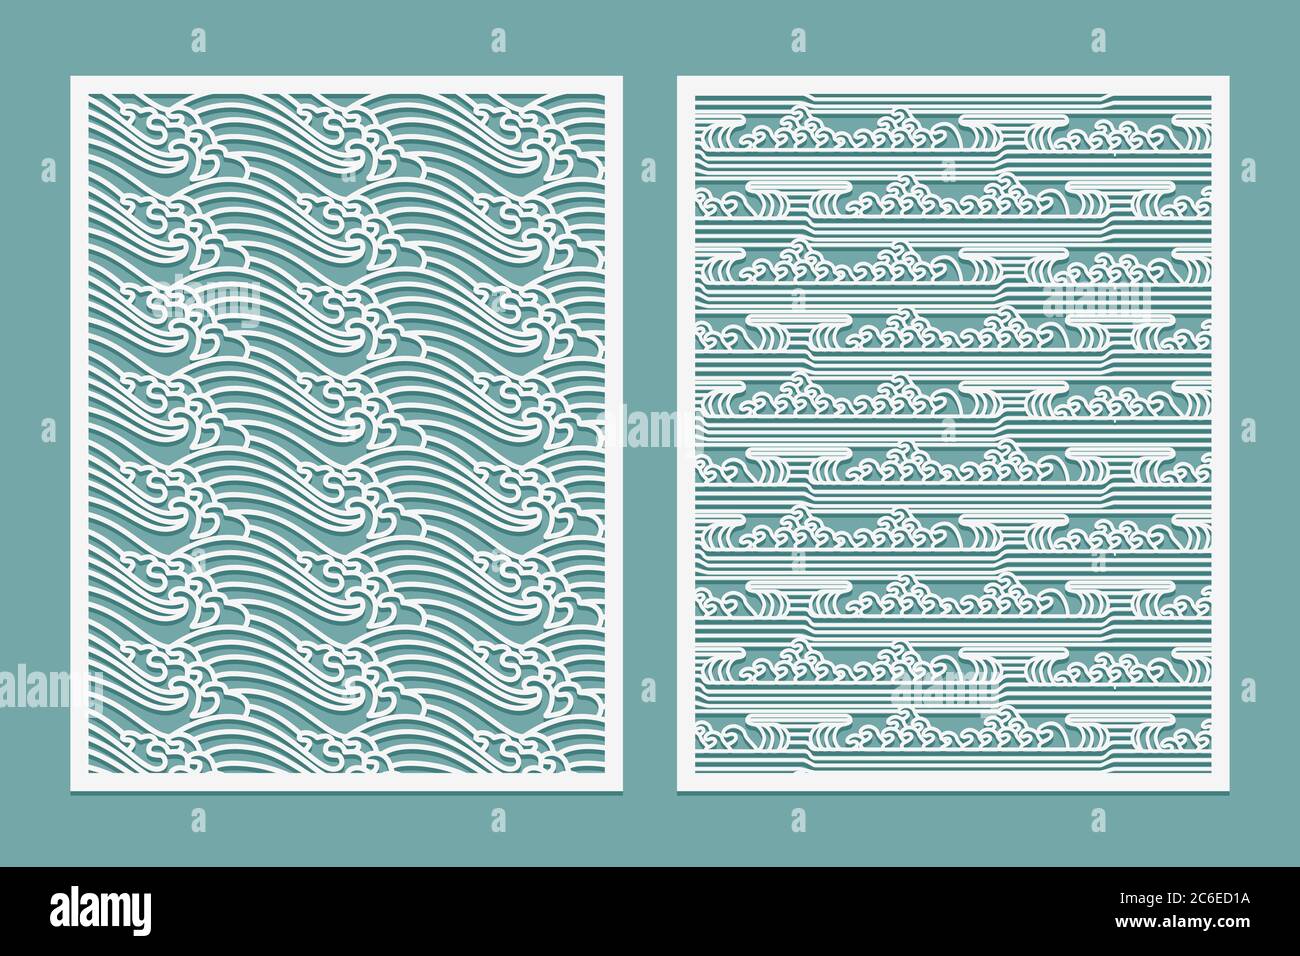 Laser cut templates patterns. Rivers waves Oriental style scenery Metal cutting or wood carving, panel design, stencil for fretwork, paper art, card b Stock Vector